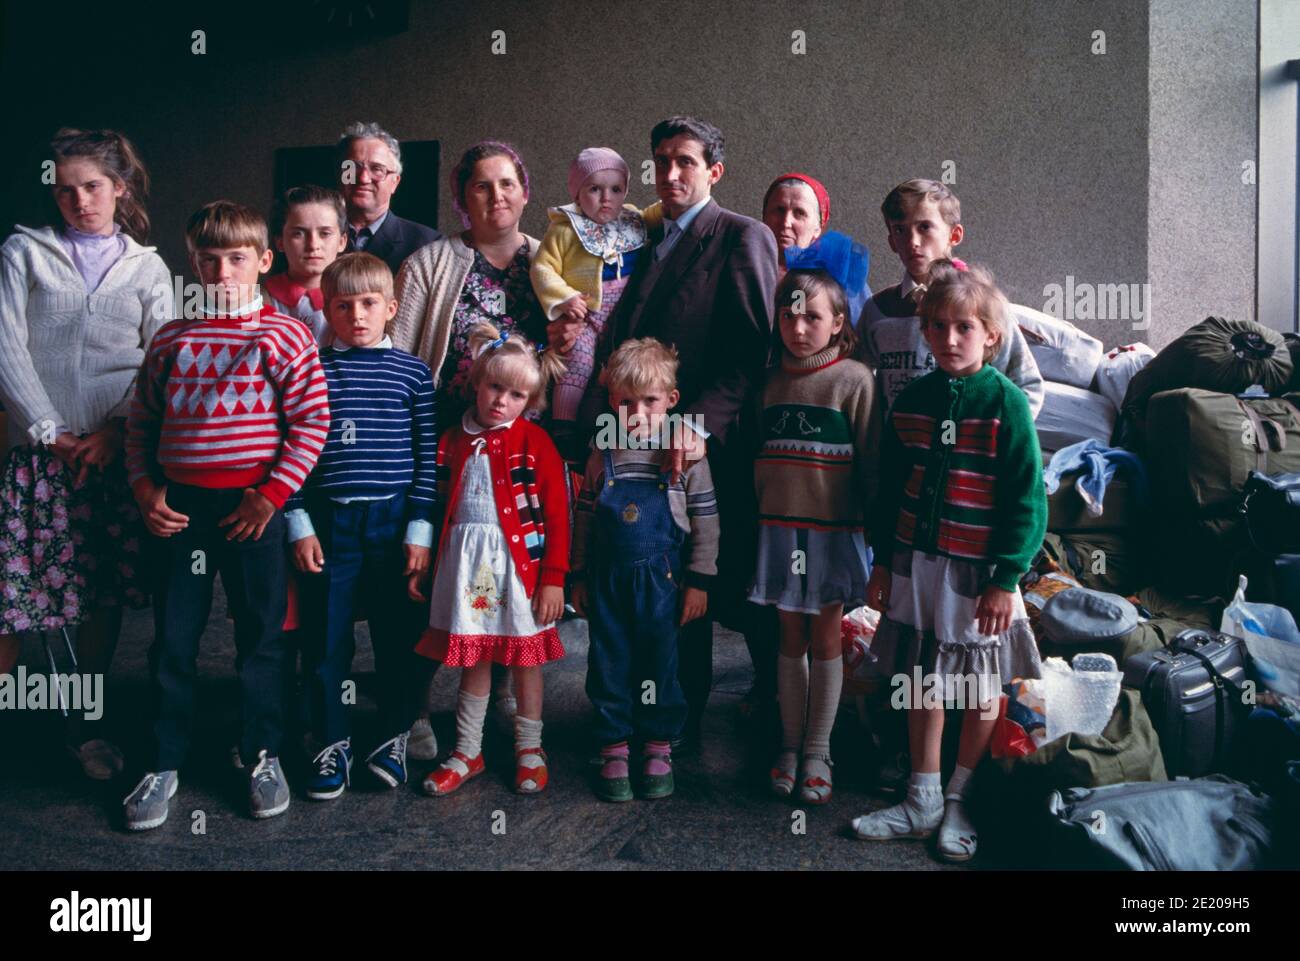 21 May 1991, Sheremetyevo International Airport, Moscow, Russia, USSR. A Russian German multigenerational family waits with their belongings inside the airport for days for their flight to Germany. Stock Photo